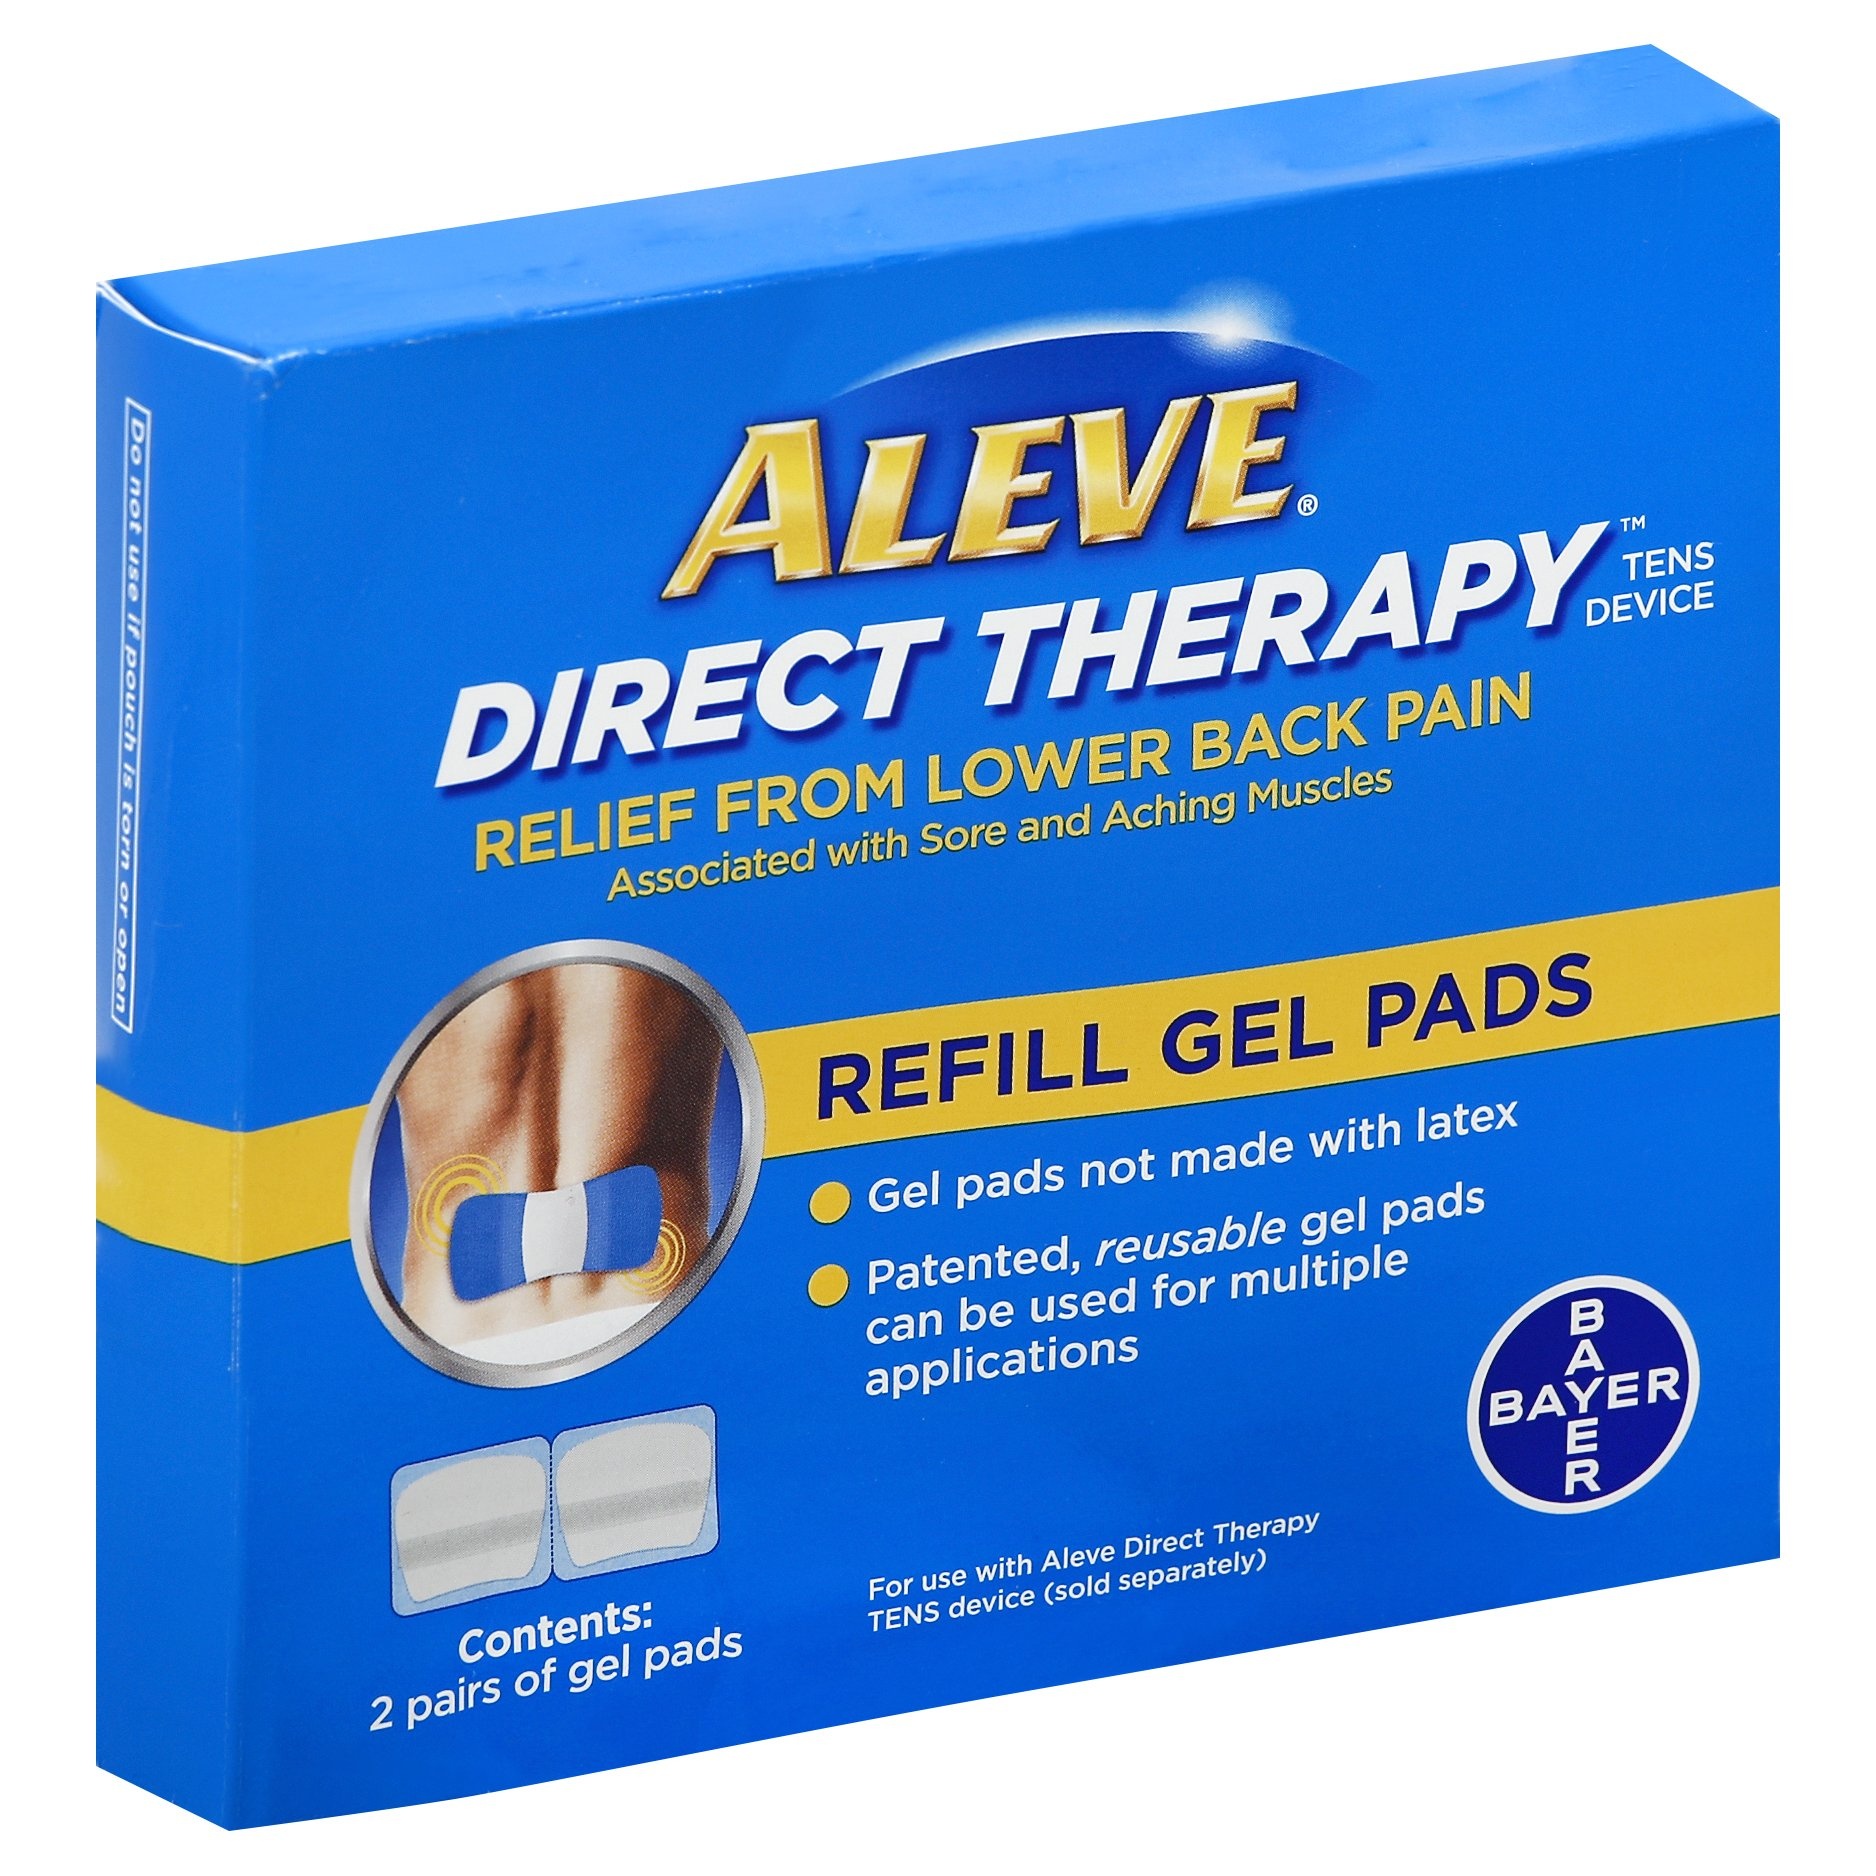 slide 1 of 1, Aleve Direct Therapy TENS Device Refill Gel Pads, 2 ct